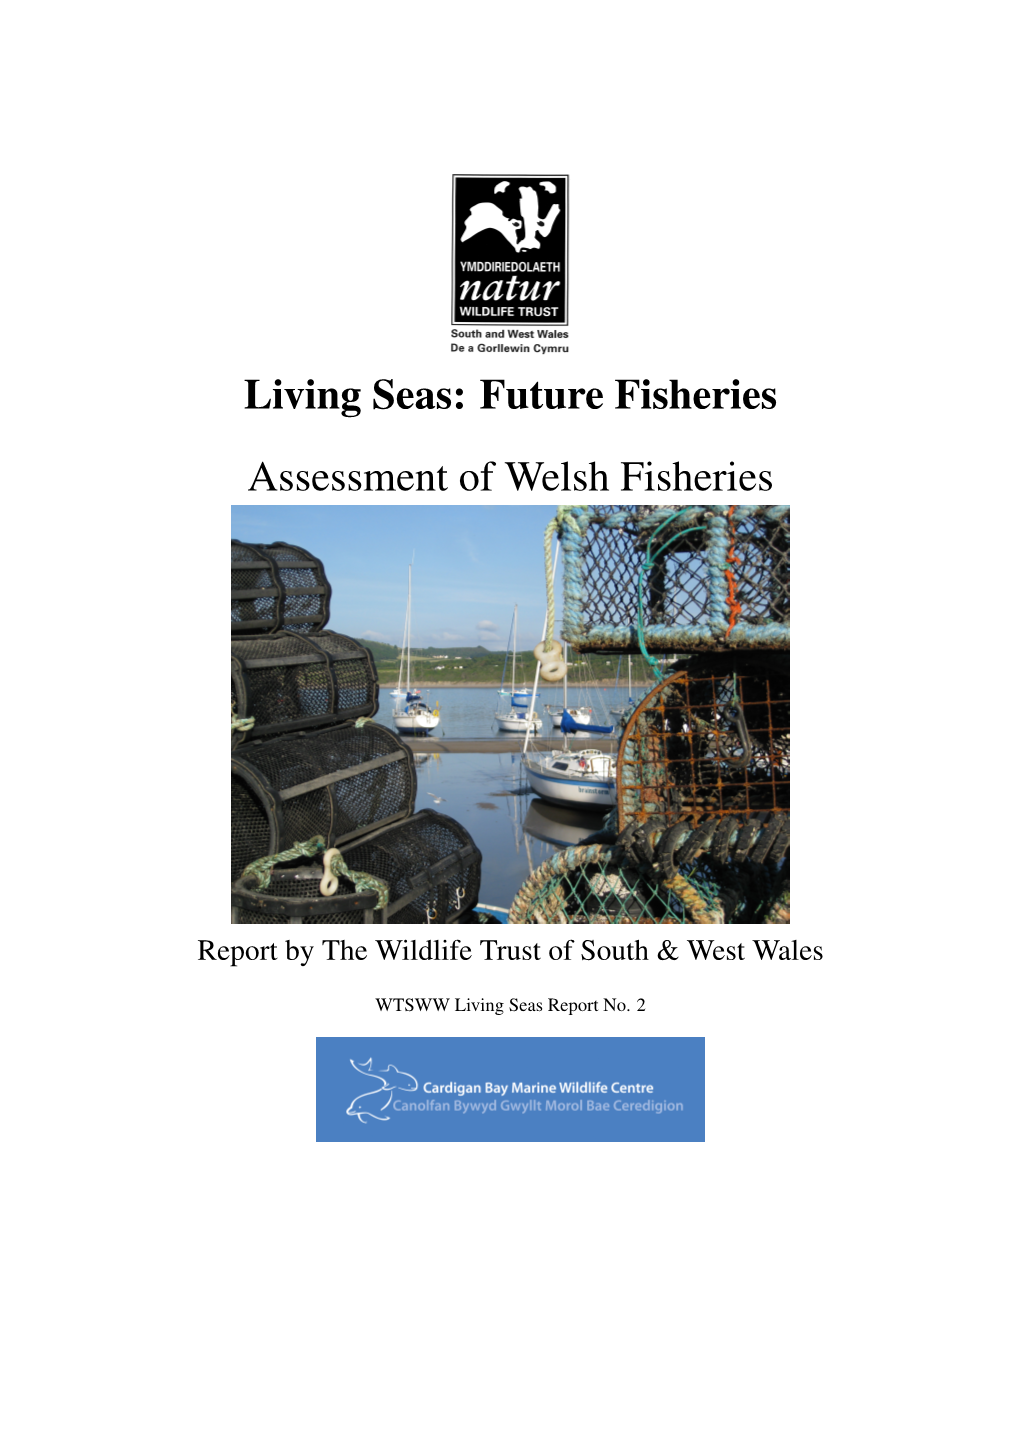 Future Fisheries Assessment of Welsh Fisheries